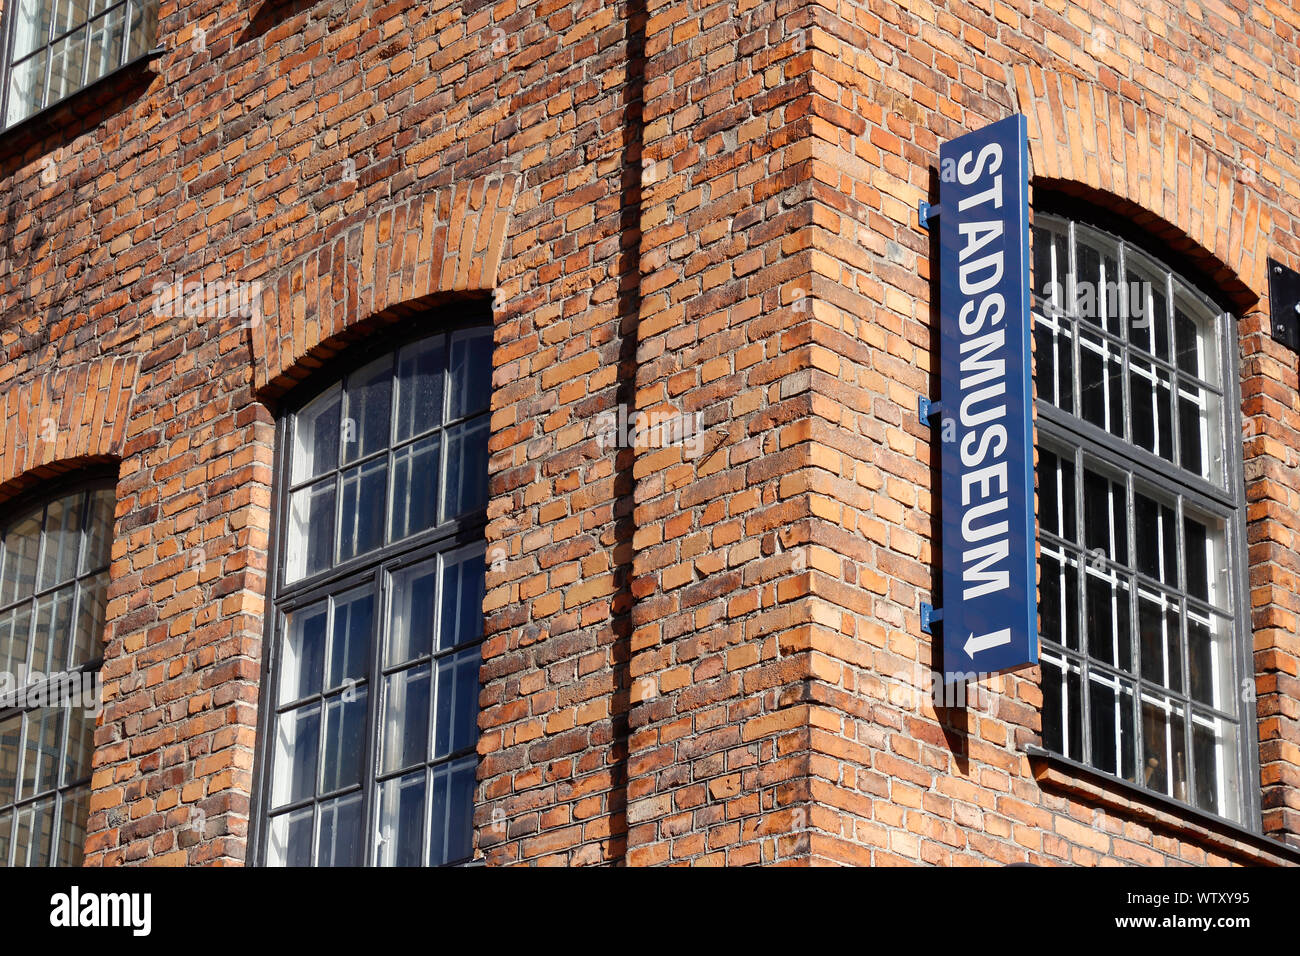 Norrkoping, Sweden - September 2, 2019: Directional sign to the City museum. Stock Photo